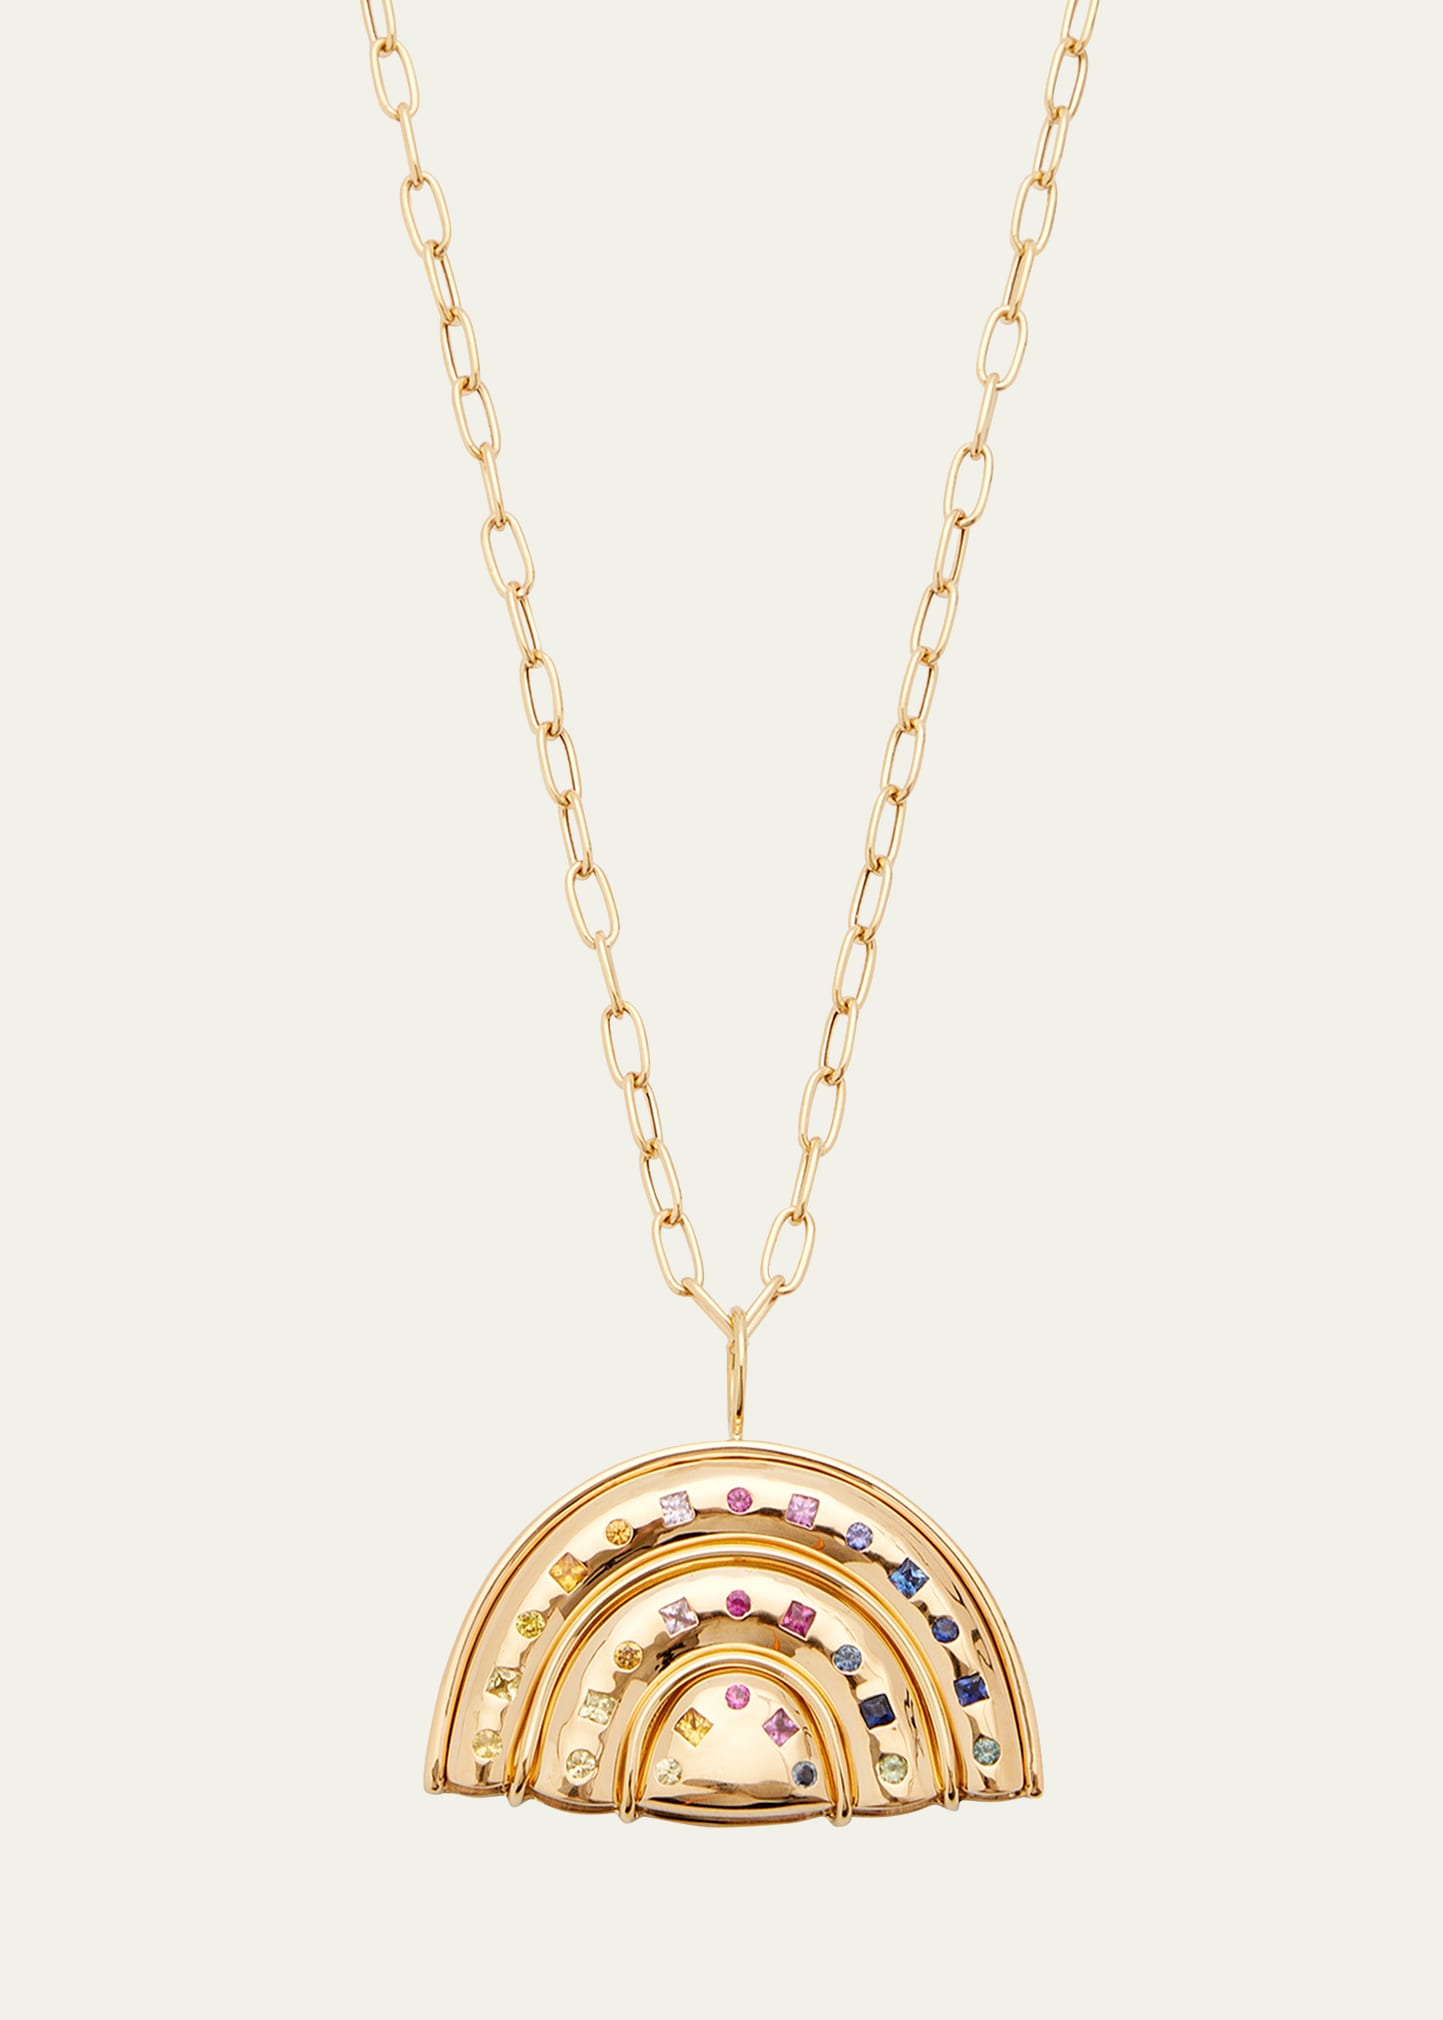 Brent Neale Medium Gold Marianne Pendant Necklace with Rainbow Sapphires